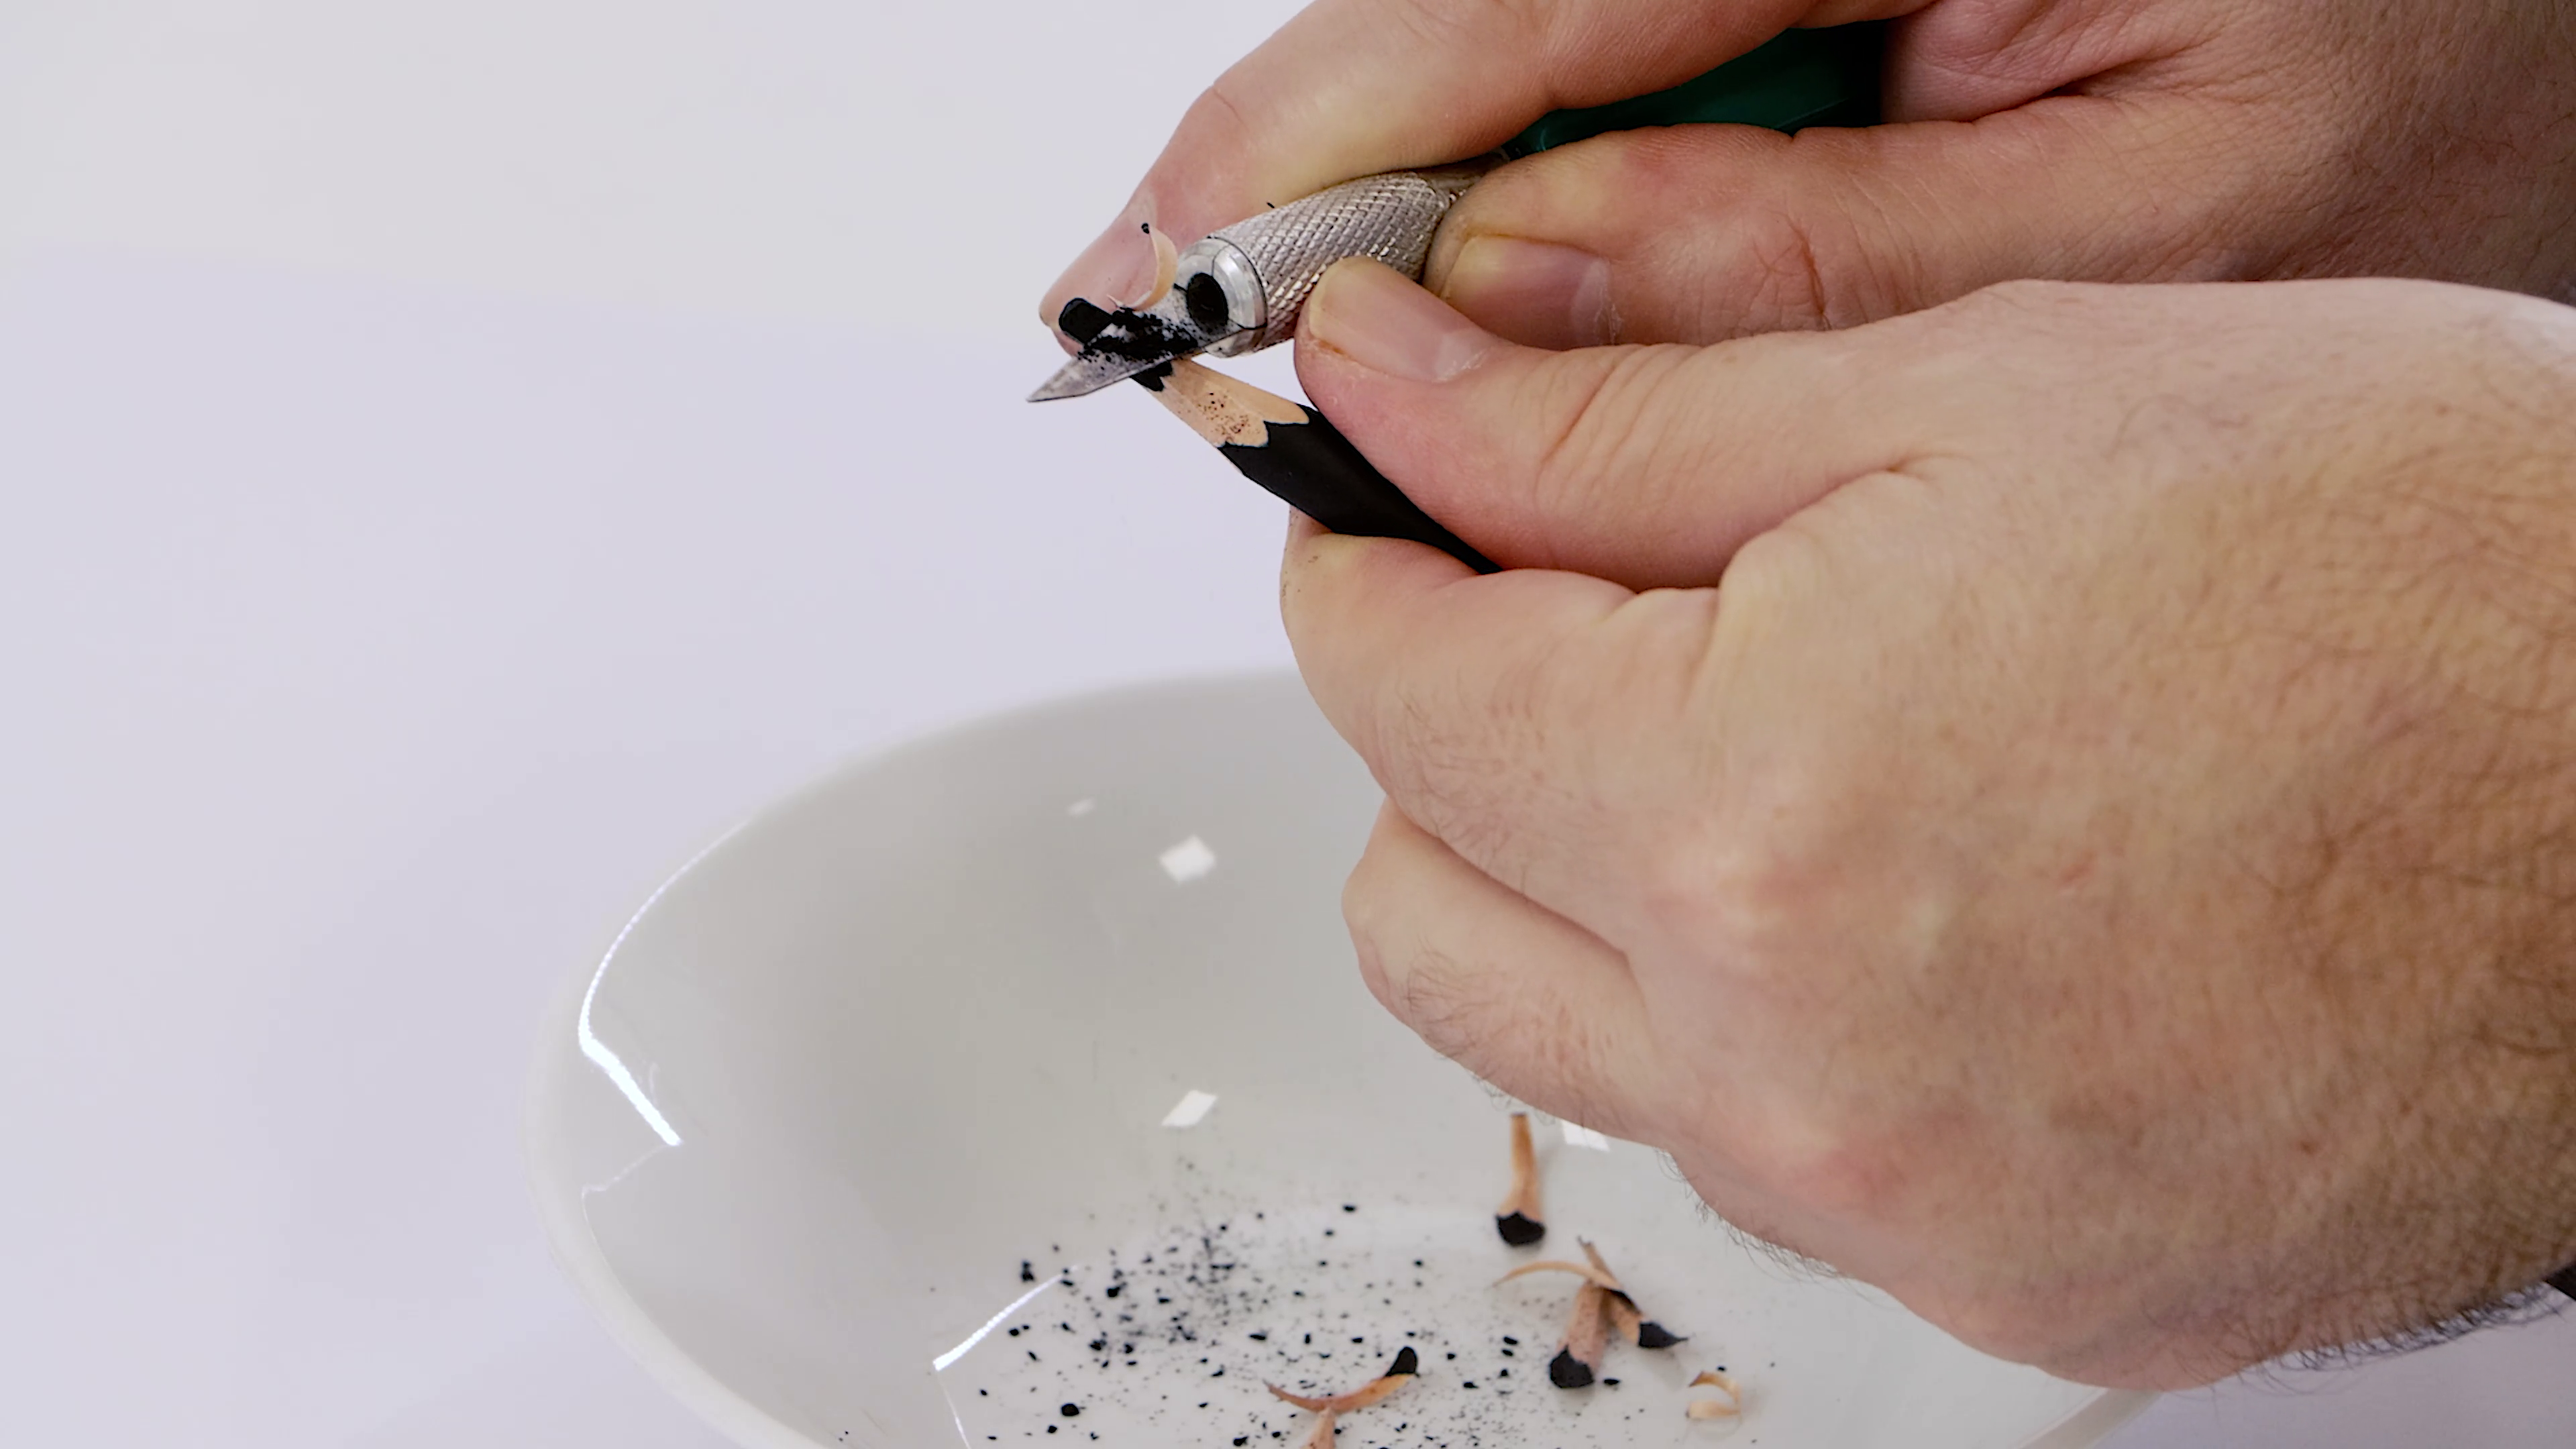 1. Precision Knife being used to sharpen a charcoal pencil